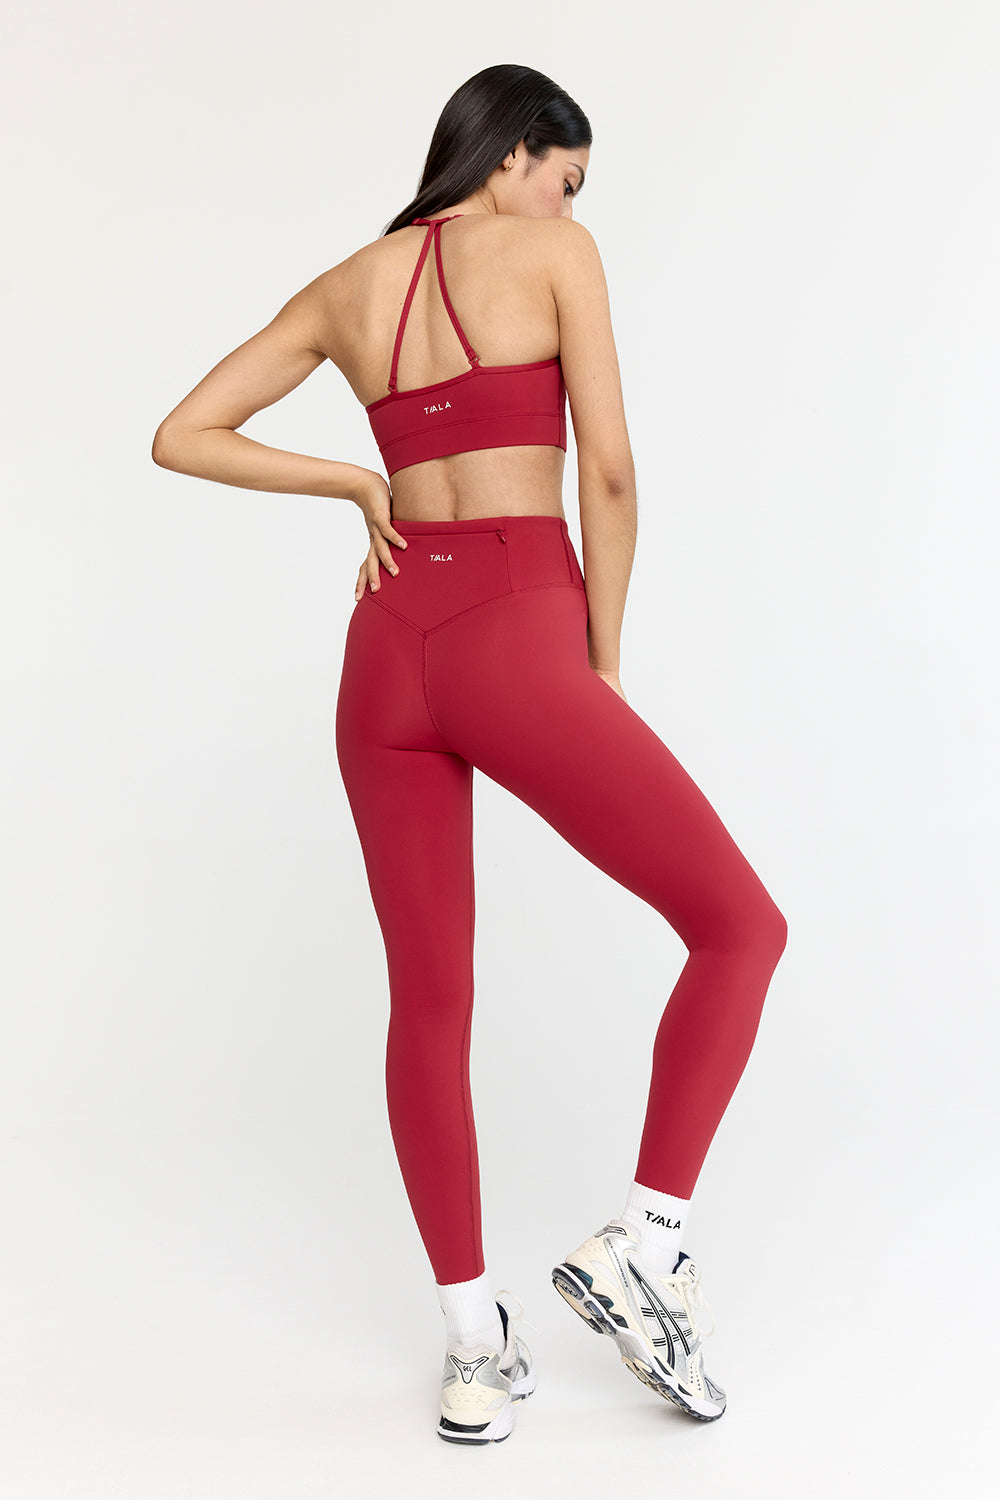 SKINLUXE HIGH WAISTED LEGGING - RETRO RED – TALA